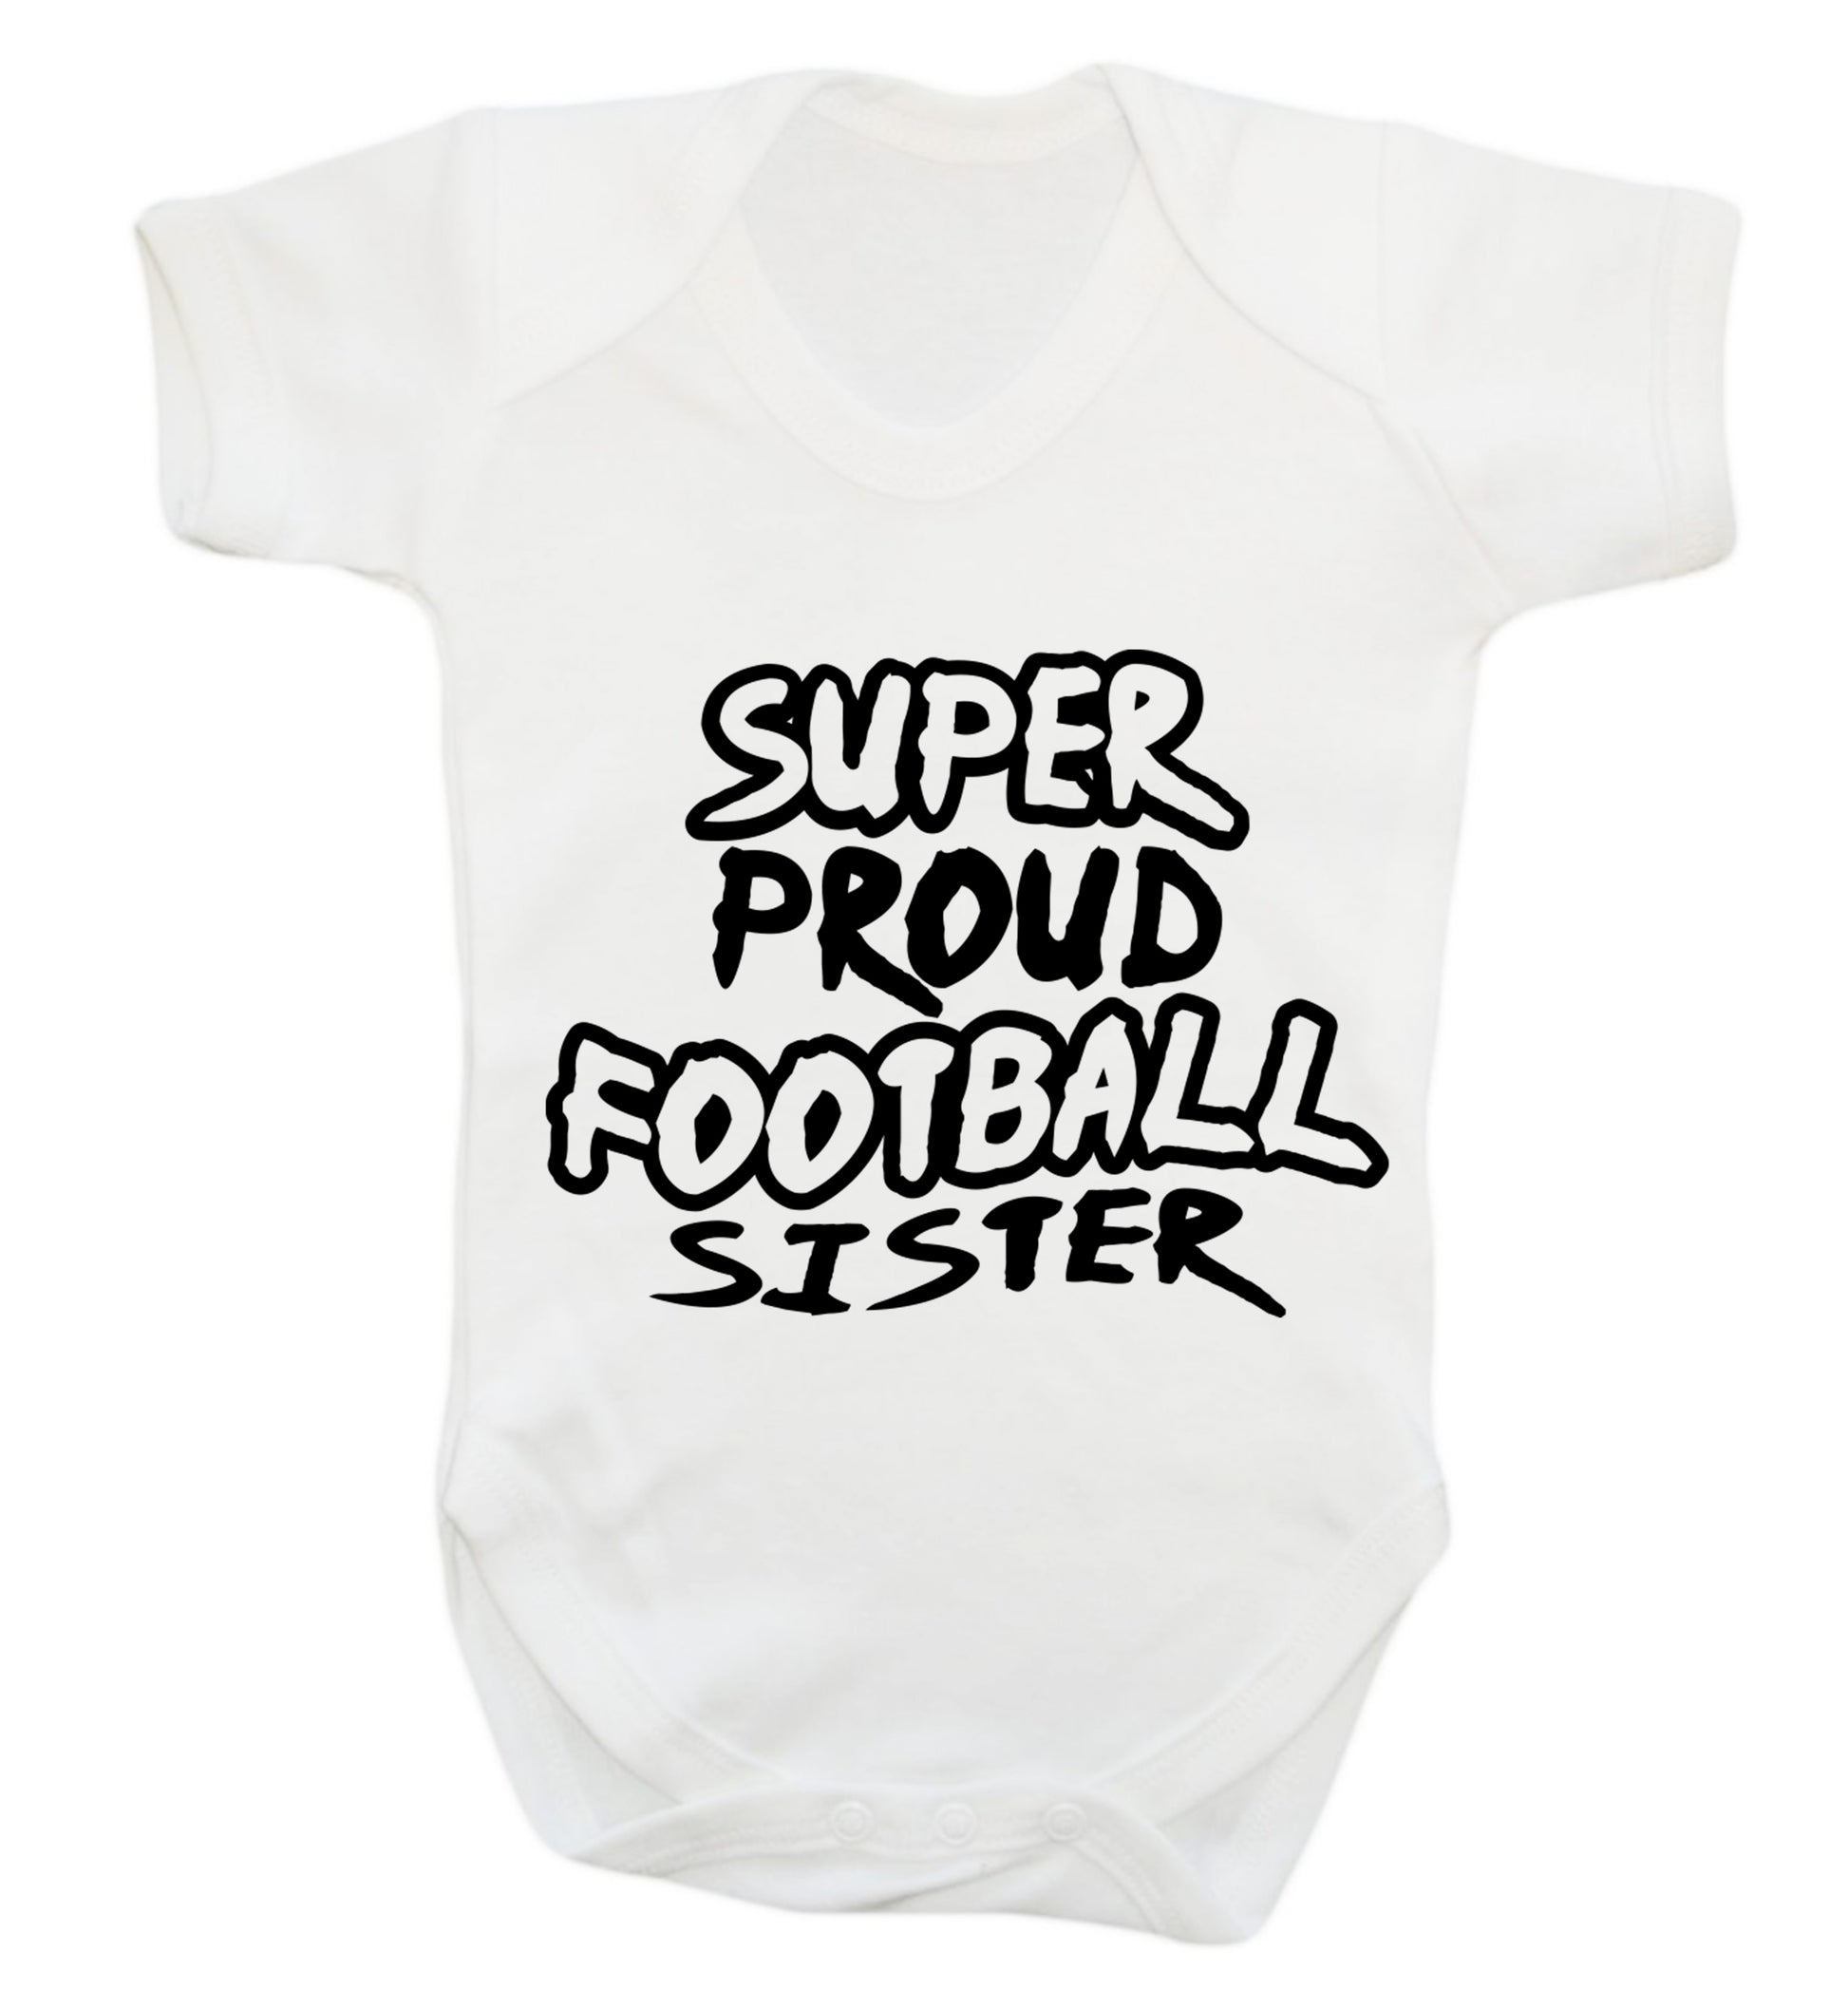 Super proud football sister Baby Vest white 18-24 months